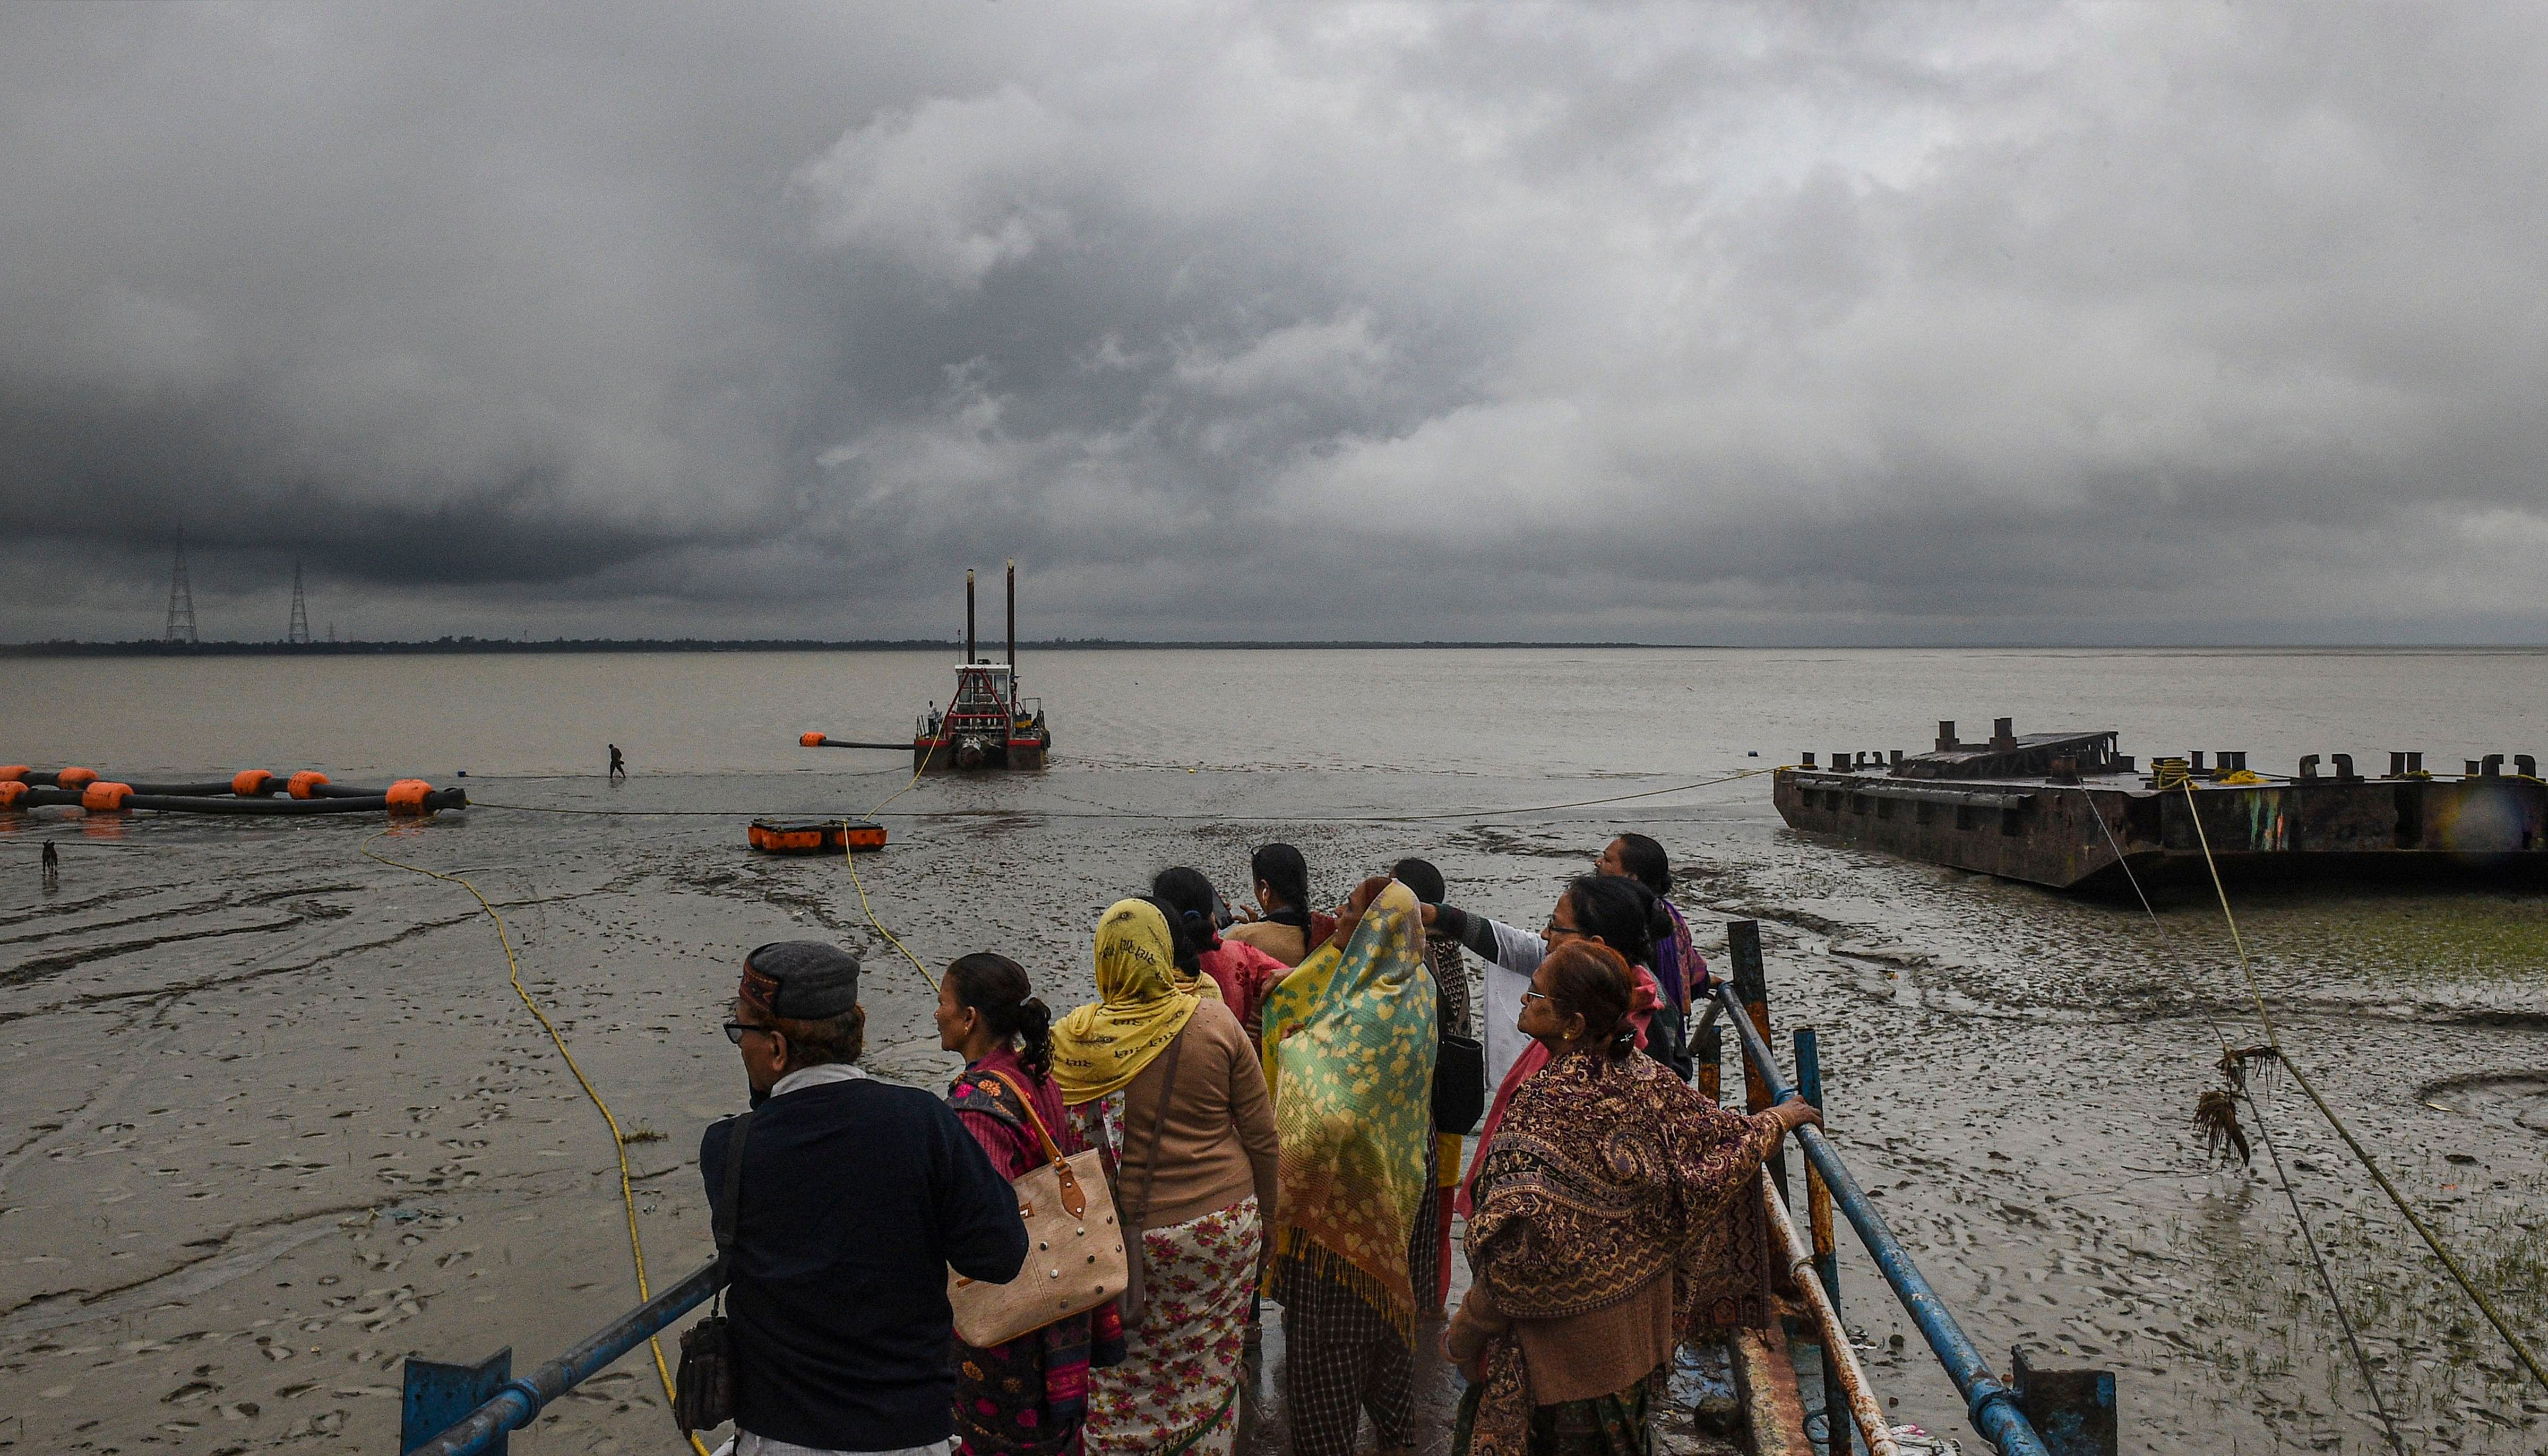  Villagers look into the sea in the wake of the very severe cyclonic storm 'Bulbul', which is likely to make landfall between West Bengal-Bangladesh coasts by late November 9 evening or night, at Kakdwip in South 24 Parganas. (PTI Photo)